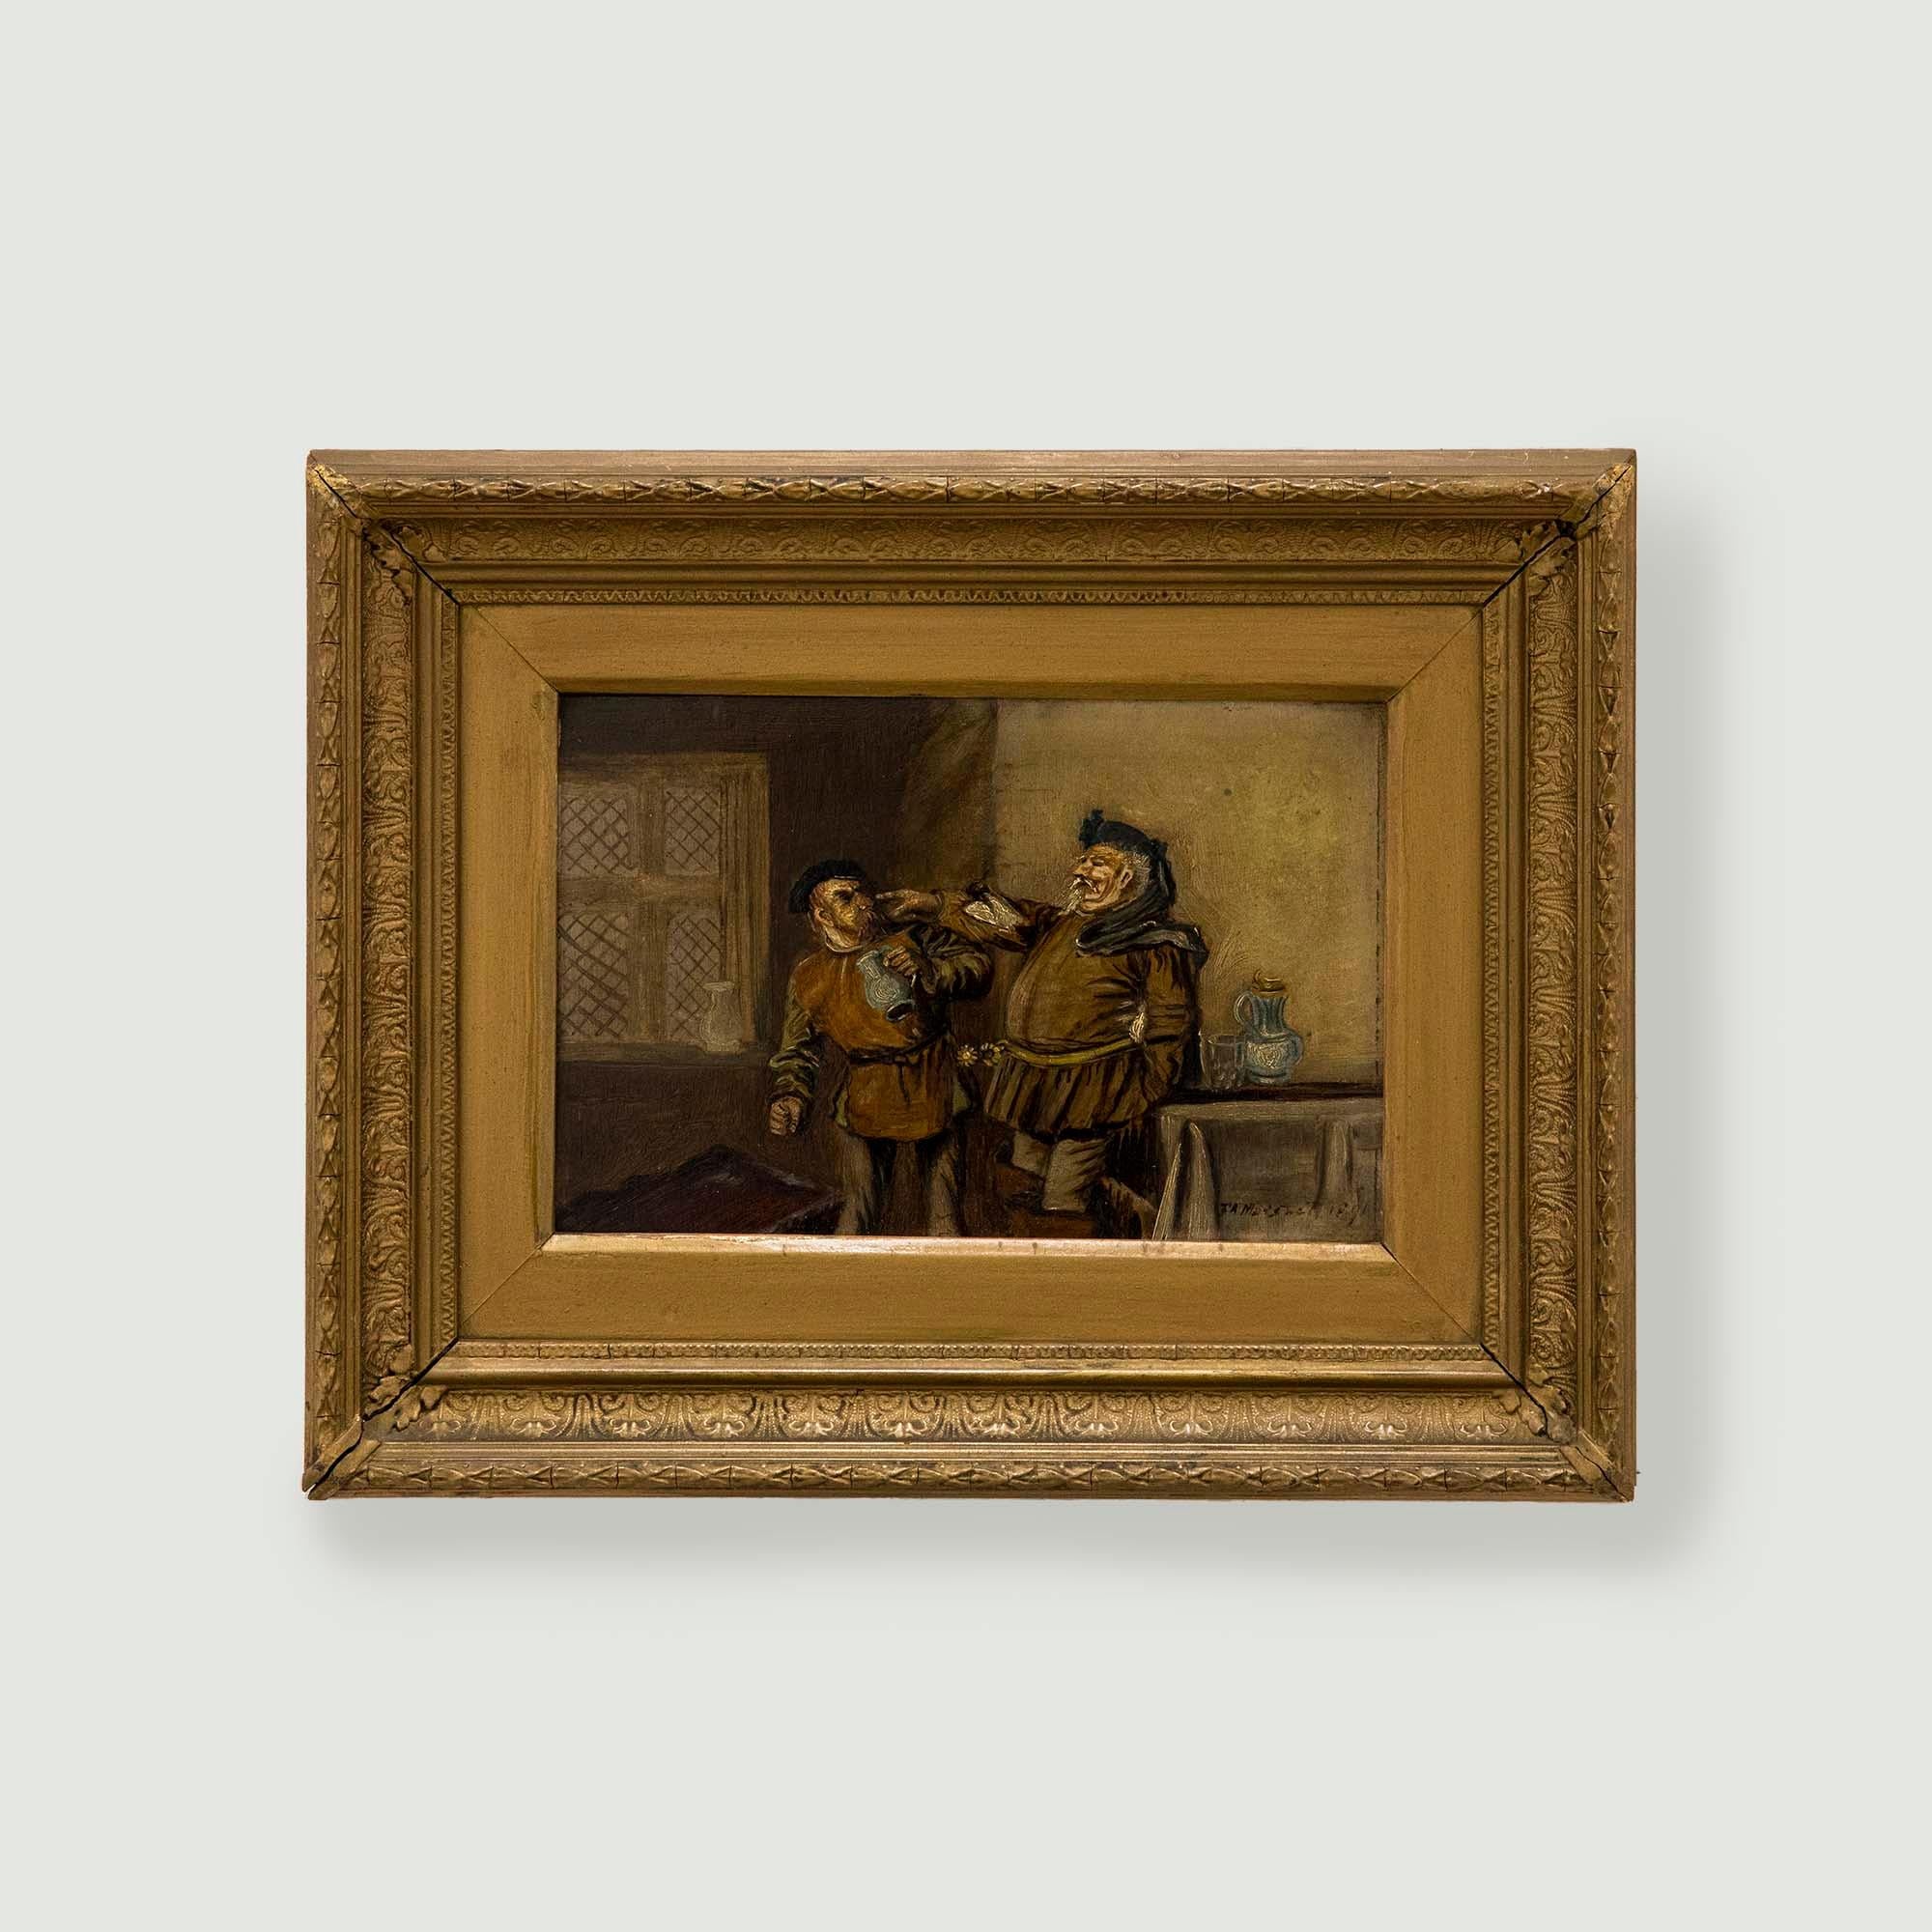 A humorous moment captured in oil, showing two men at an inn, having a drunken disagreement. A portly man points aggressively at another man who recoils, holding his tankard of ale. The artist has signed and dated to the lower right corner and the